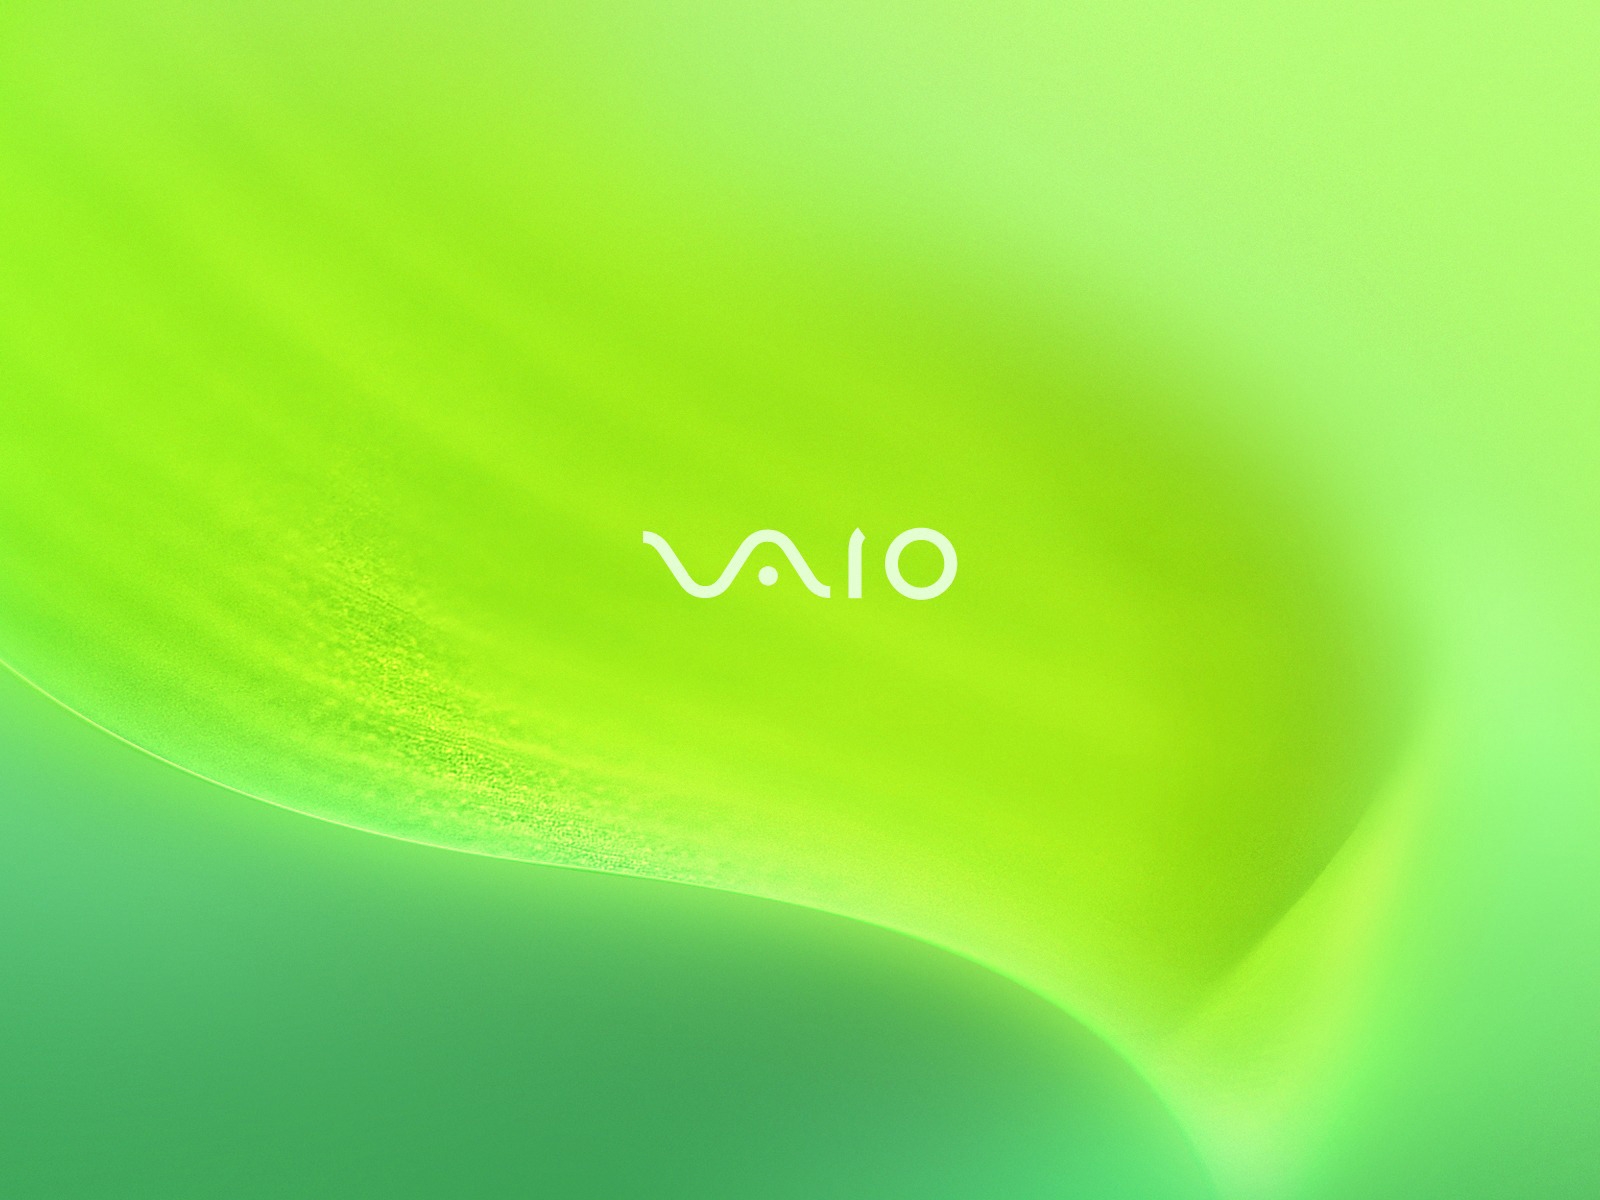 Vaio Green Leaf for 1600 x 1200 resolution